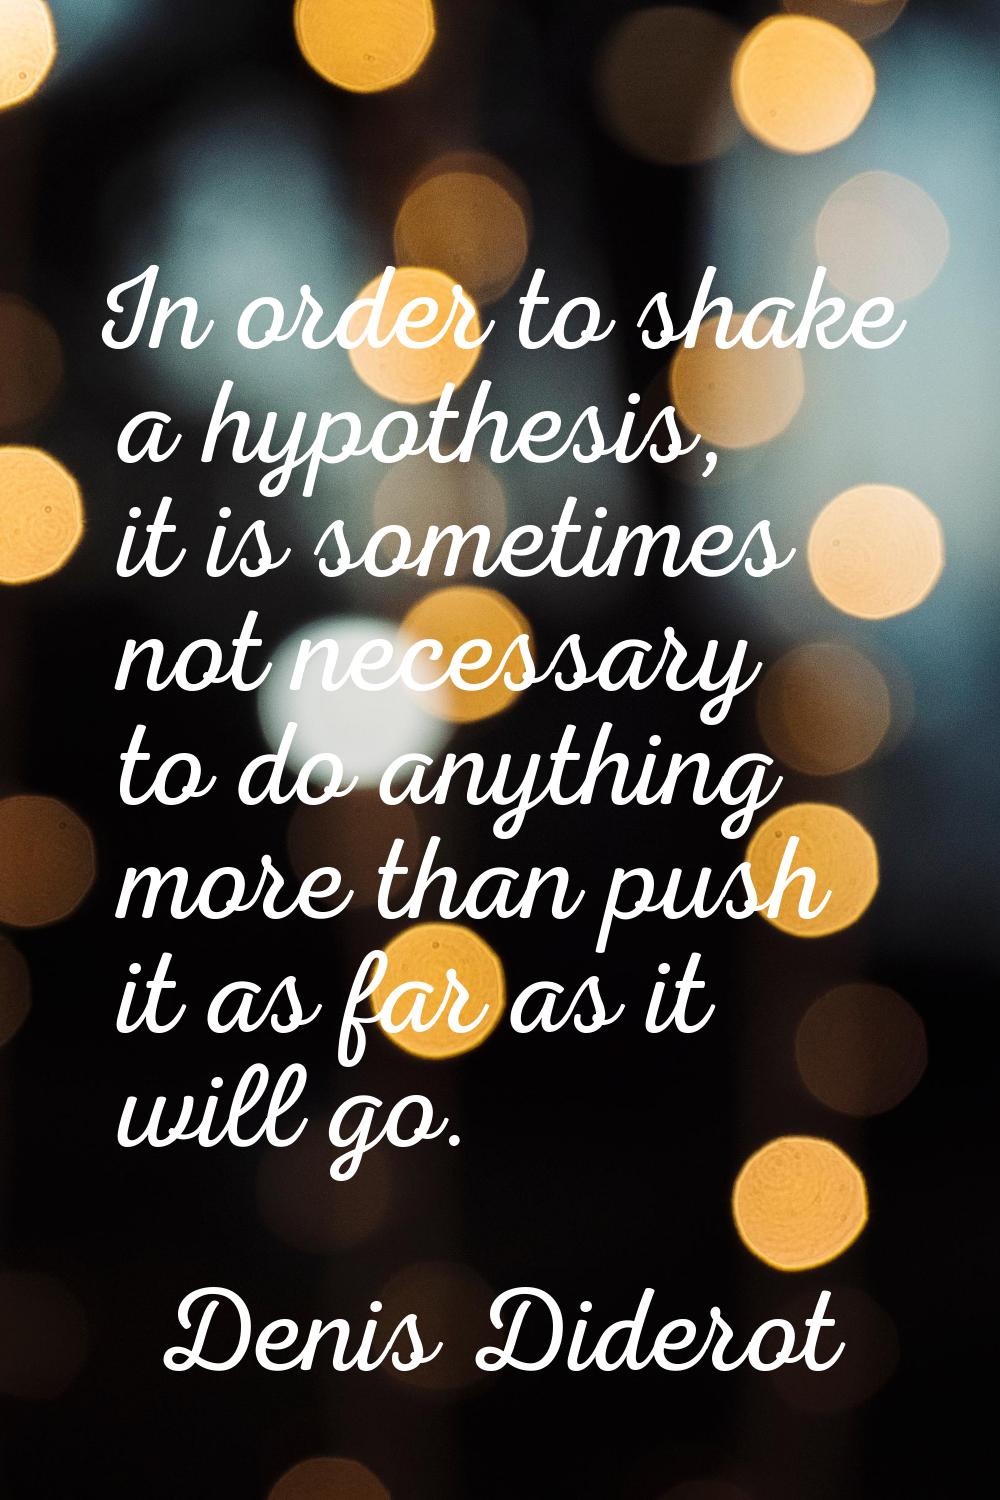 In order to shake a hypothesis, it is sometimes not necessary to do anything more than push it as f